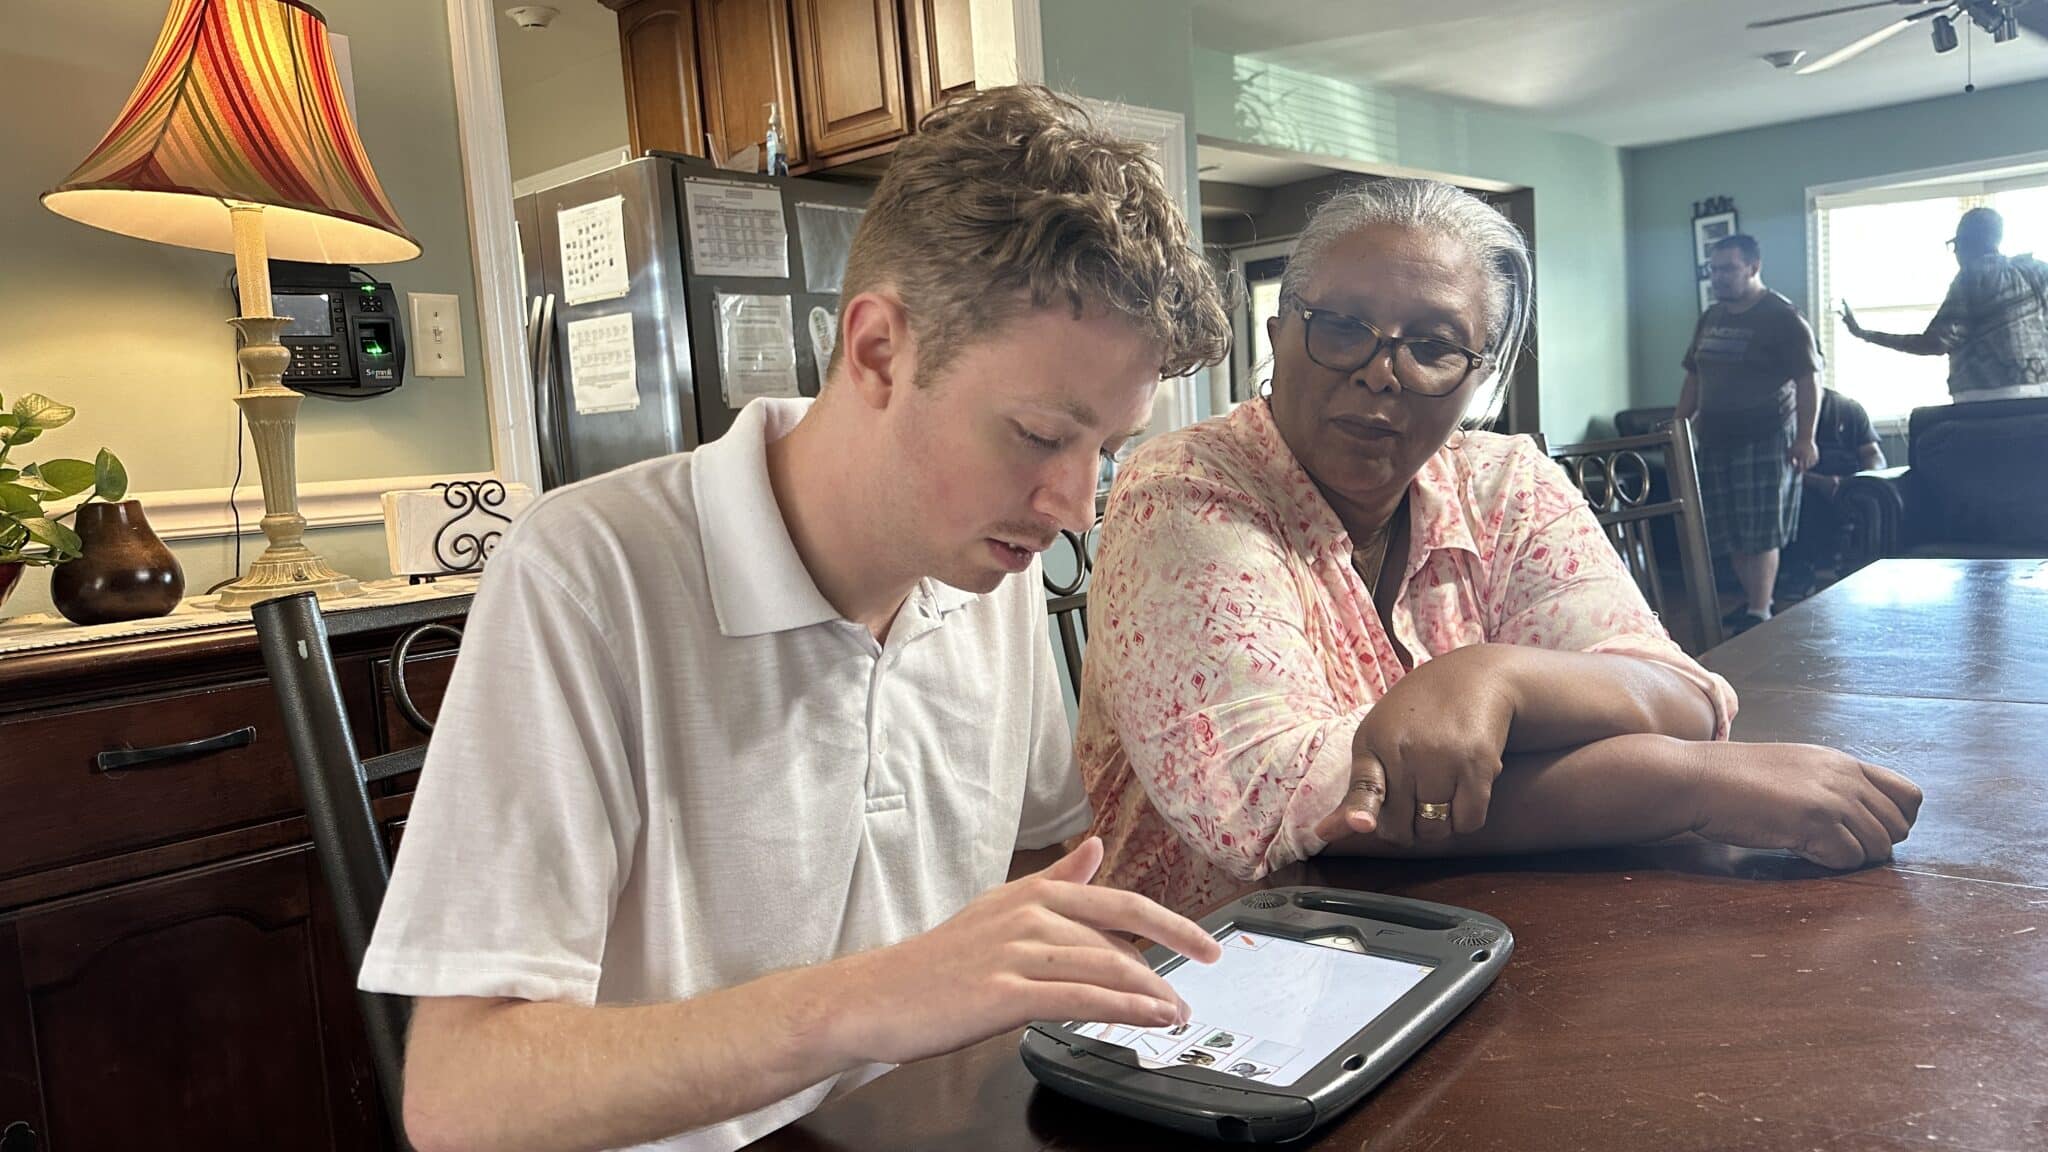 A staff member helps a person supported use his tablet